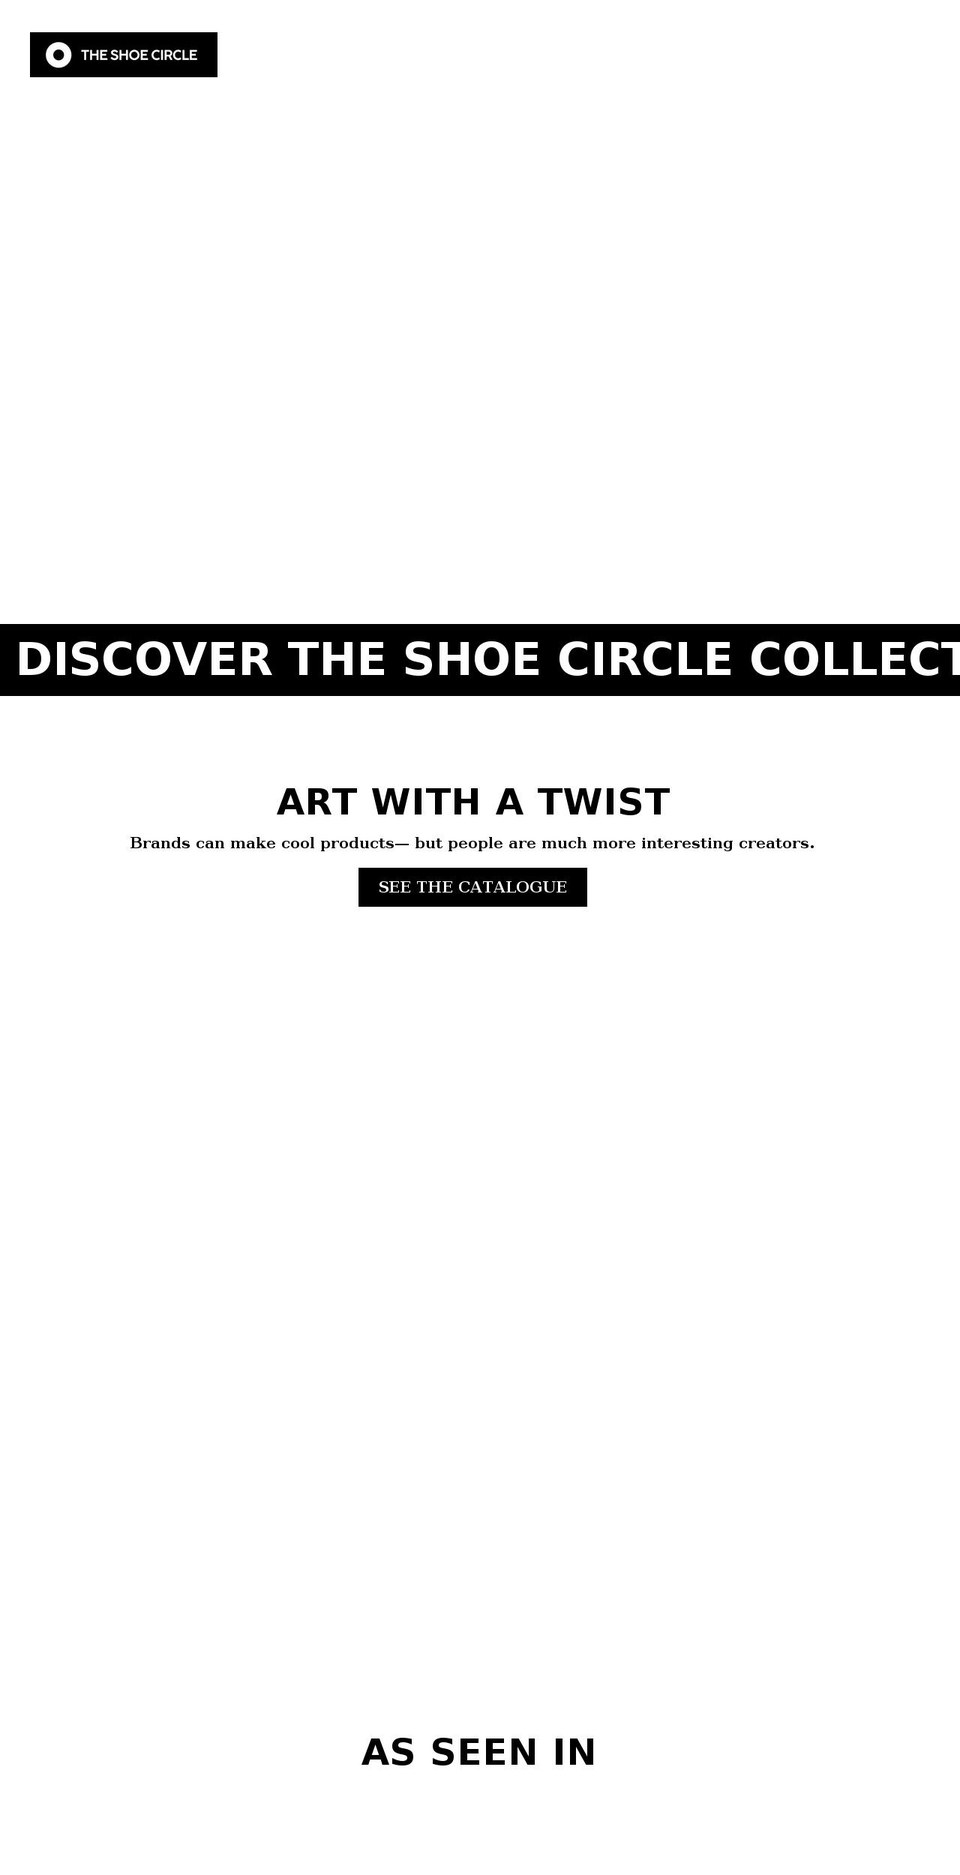 shoes Shopify theme site example theshoecircle.com